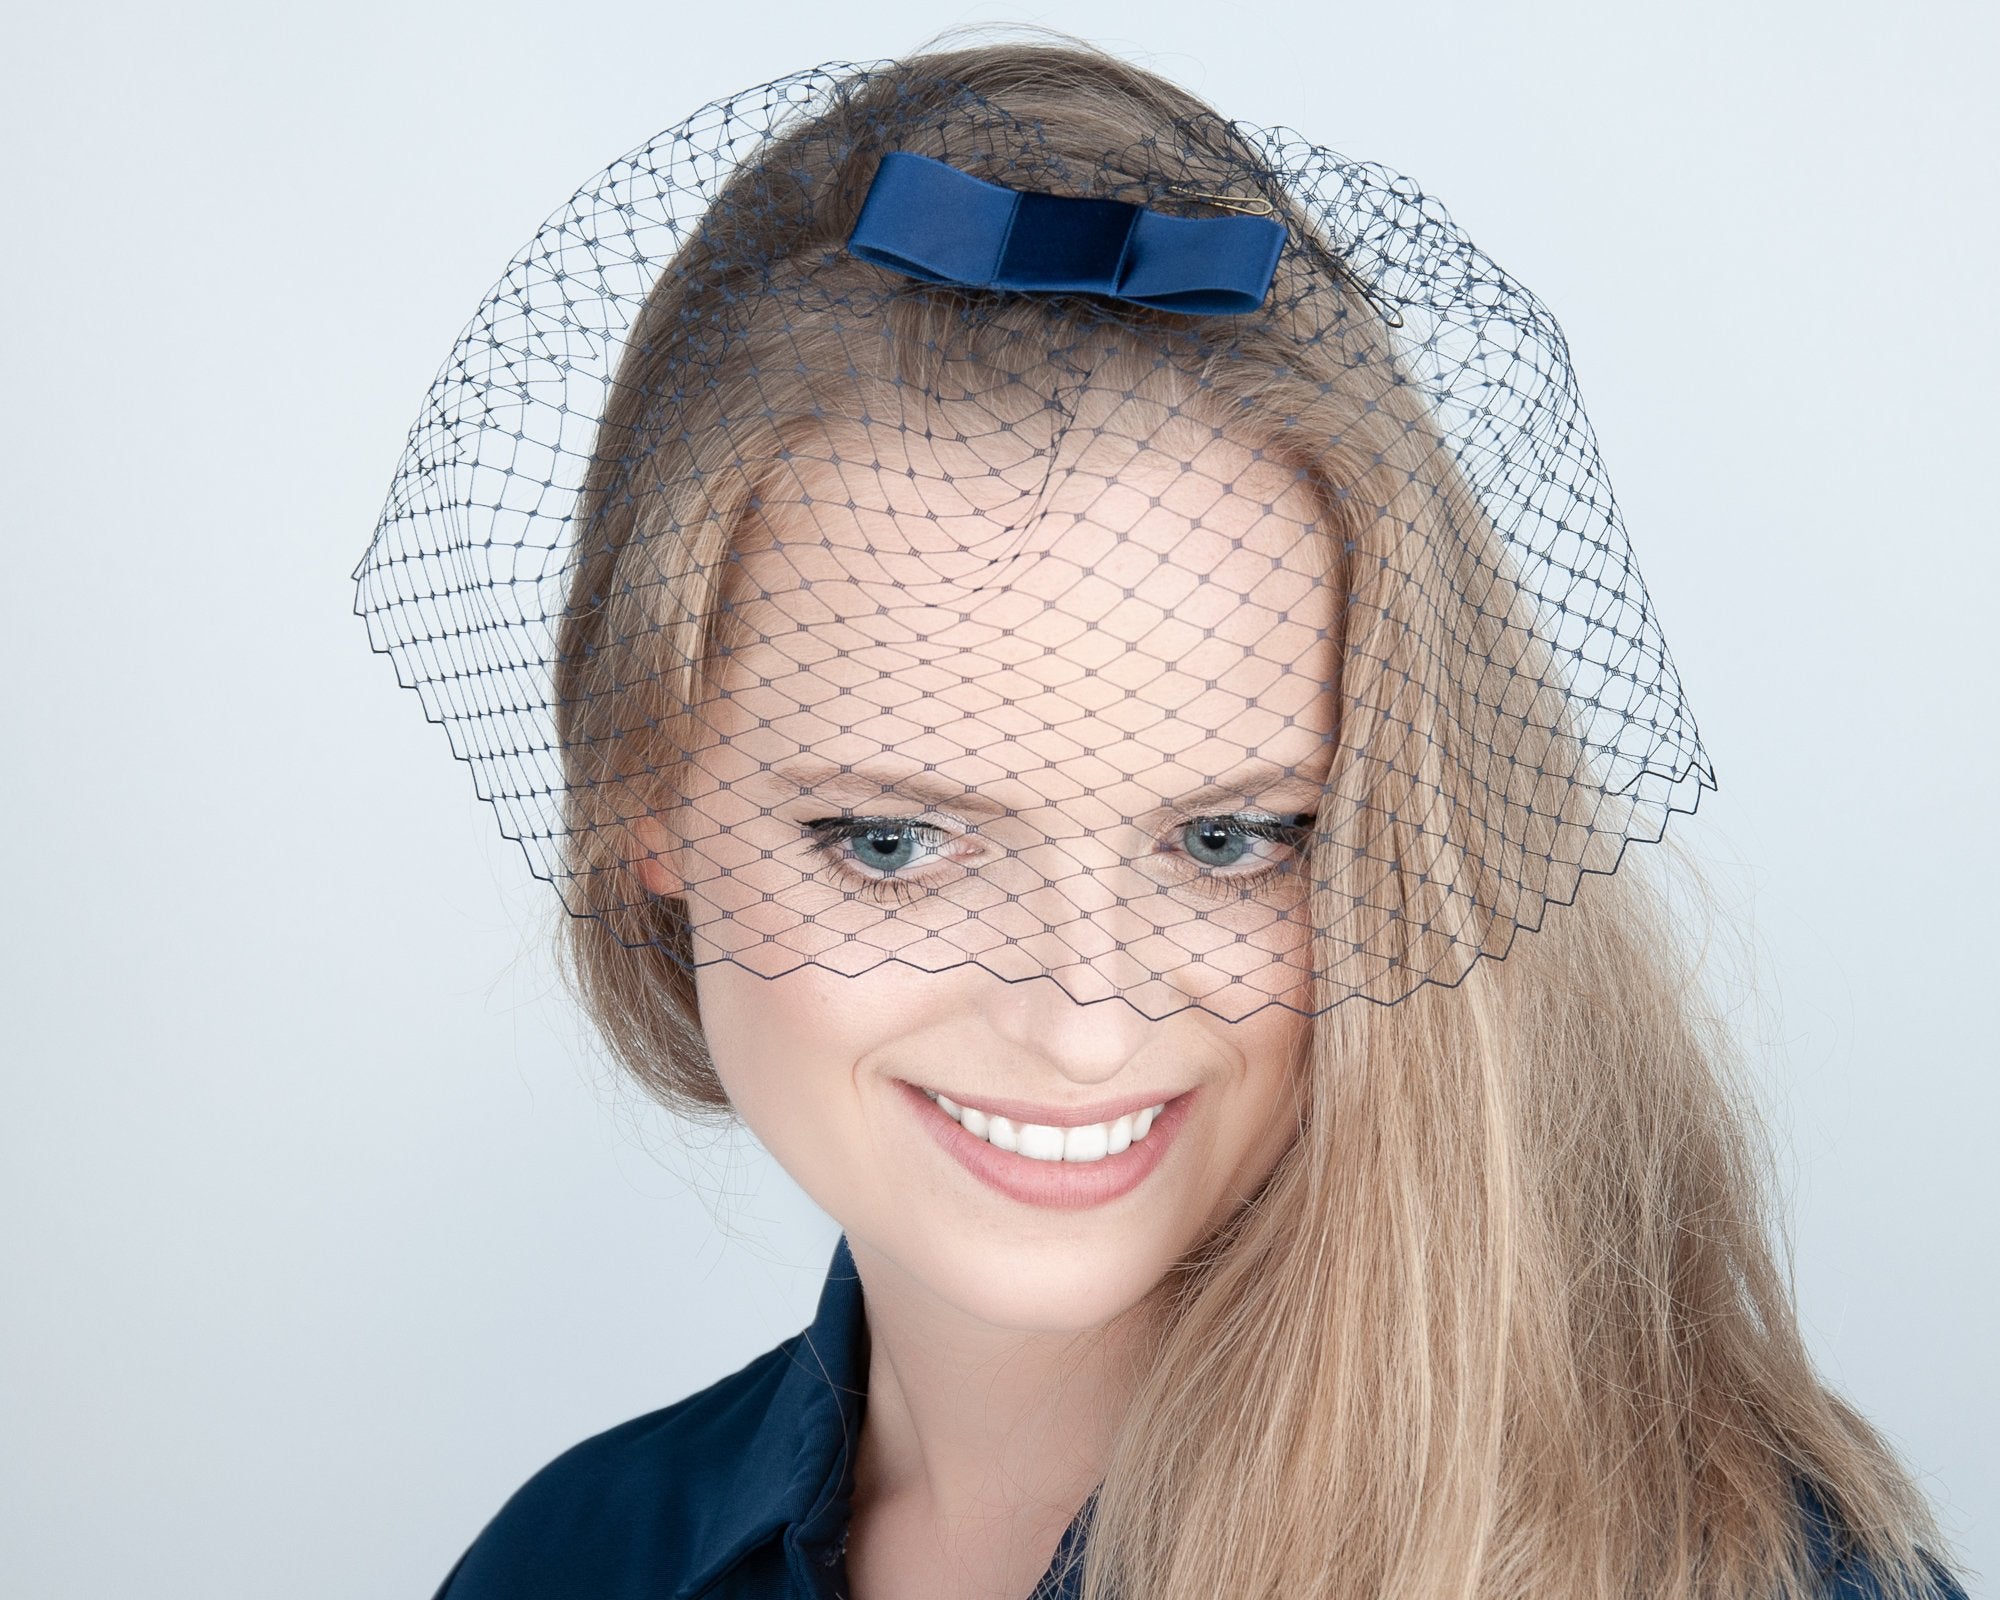 BIRDCAGE - VEIL HEADDRESS WITH A BOW IN BLUE SHADES FROM LIGHT TO DARK BLUE, BLUESTONE TO GALAXY BLUE © Seegang Berlin